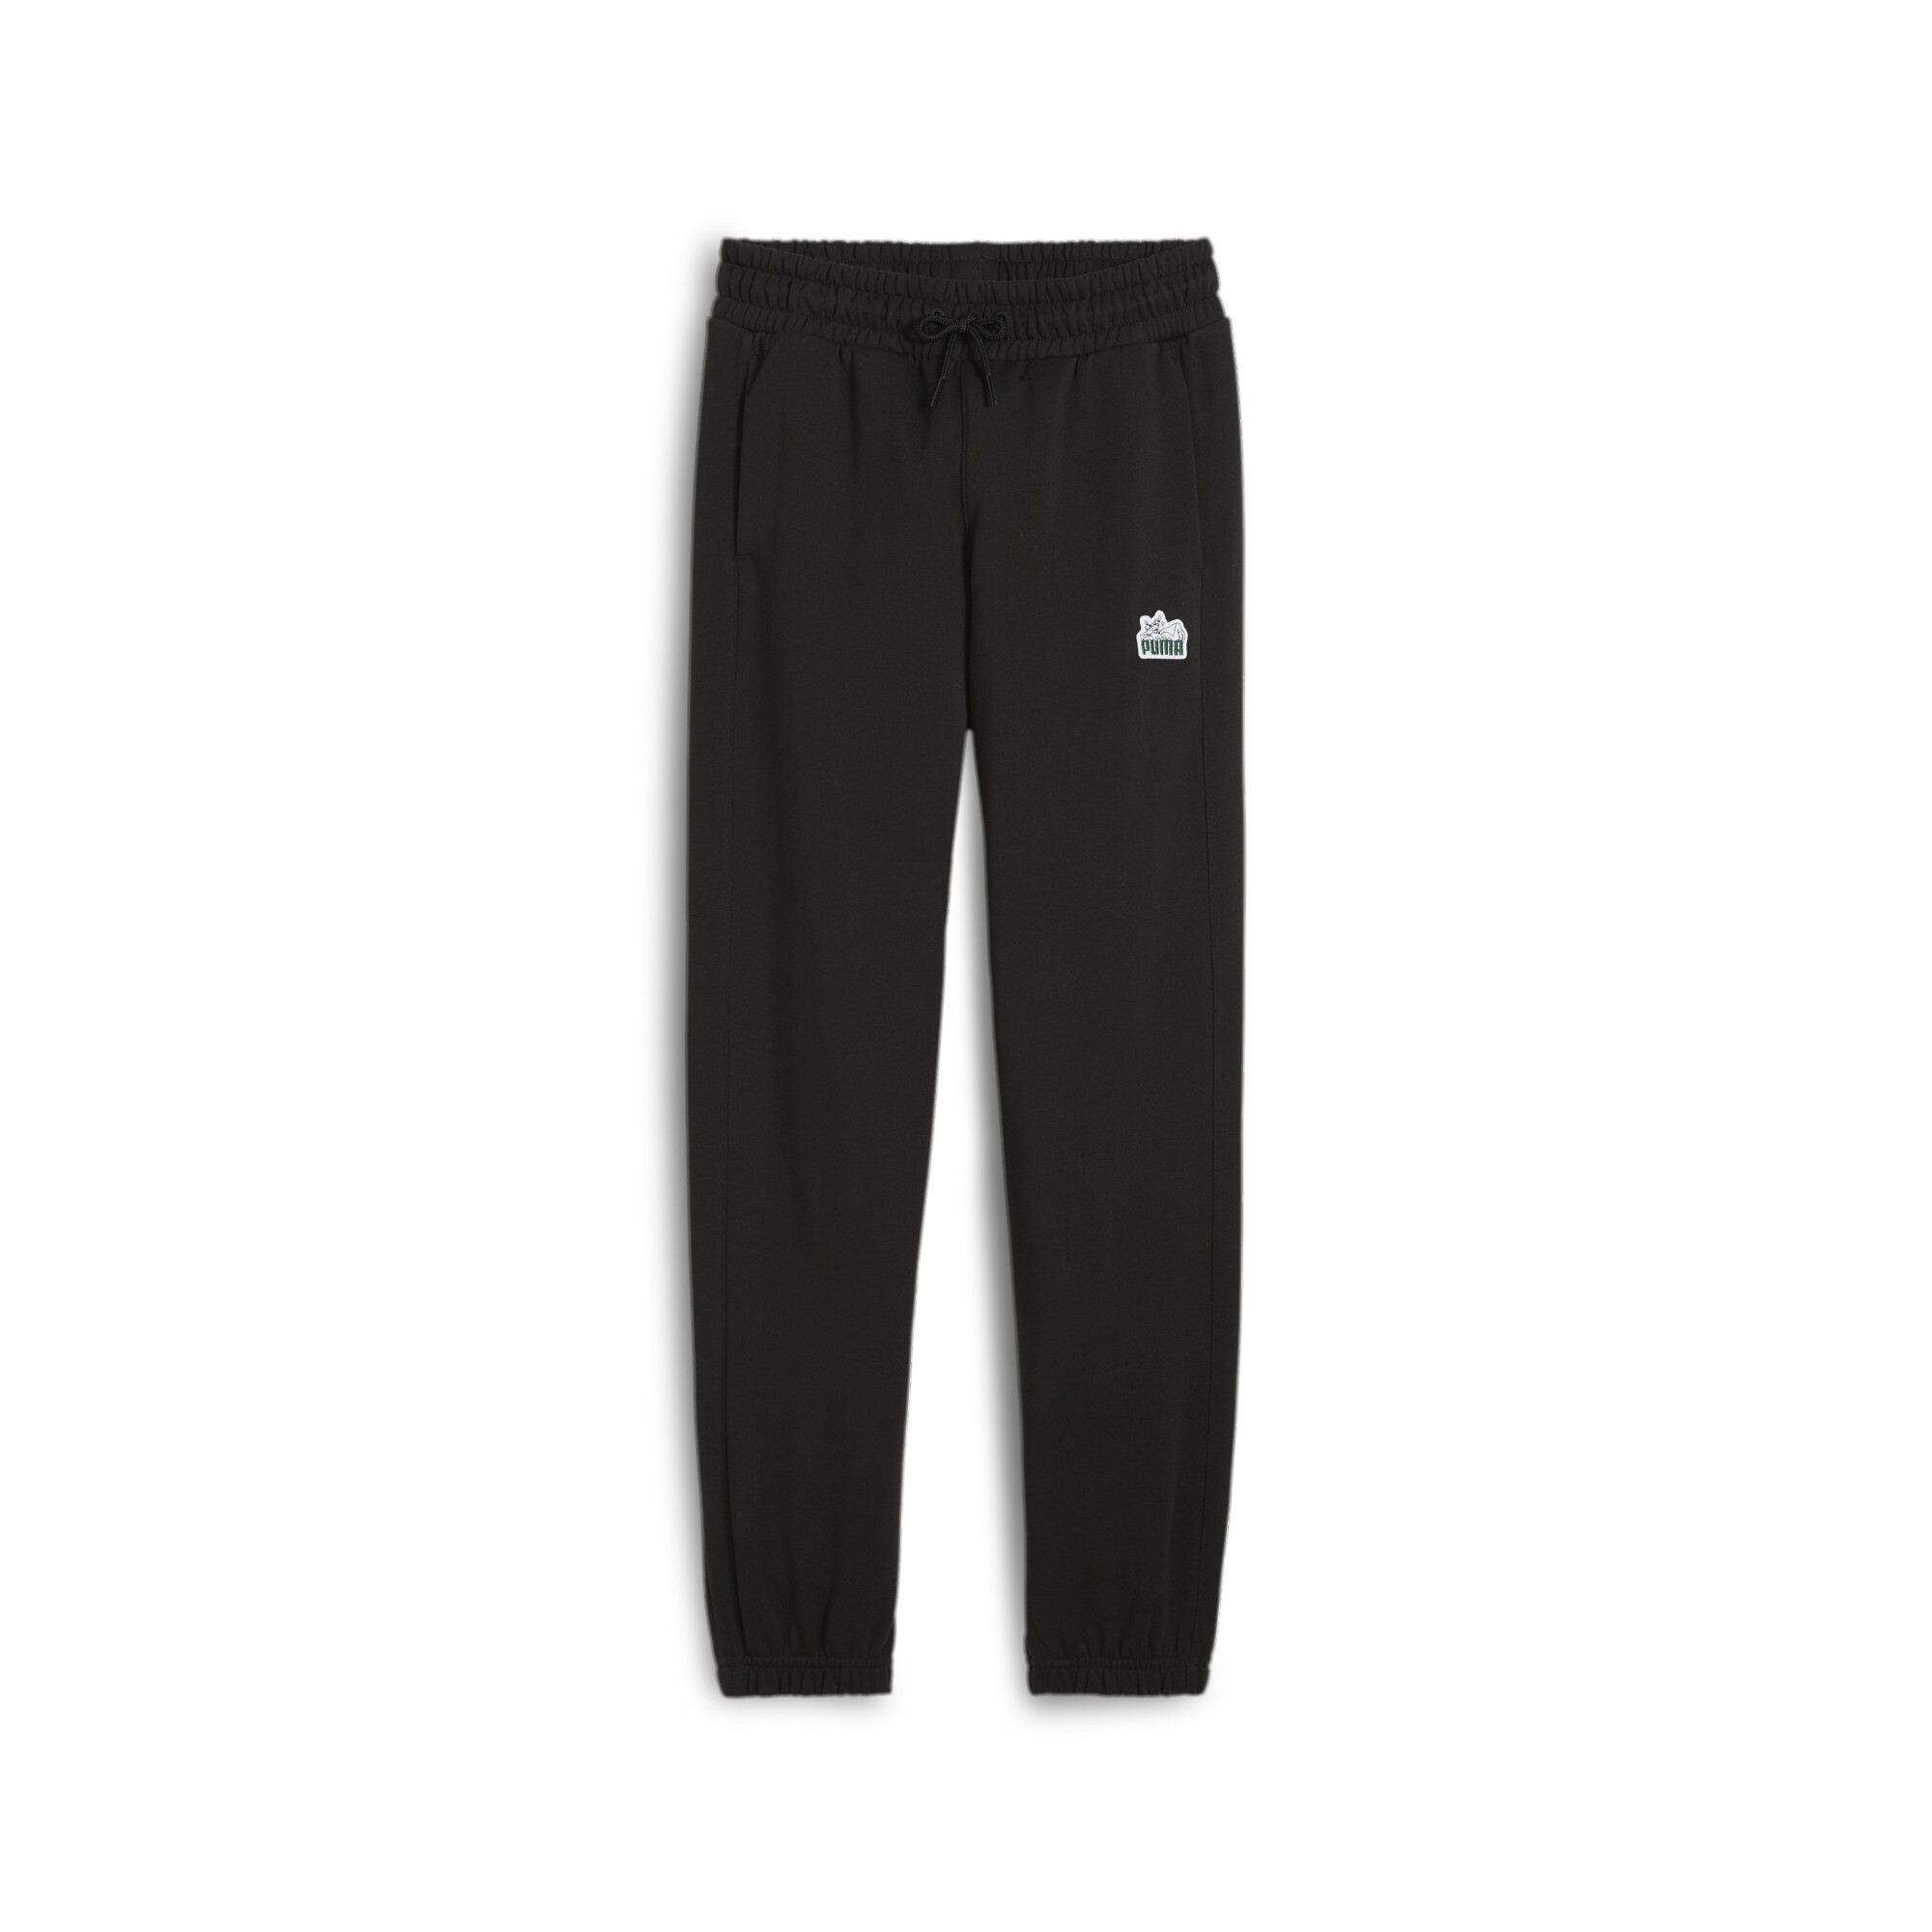 PUMA FOR THE FANBASE Sweatpants In Black, Size 15-16 Youth